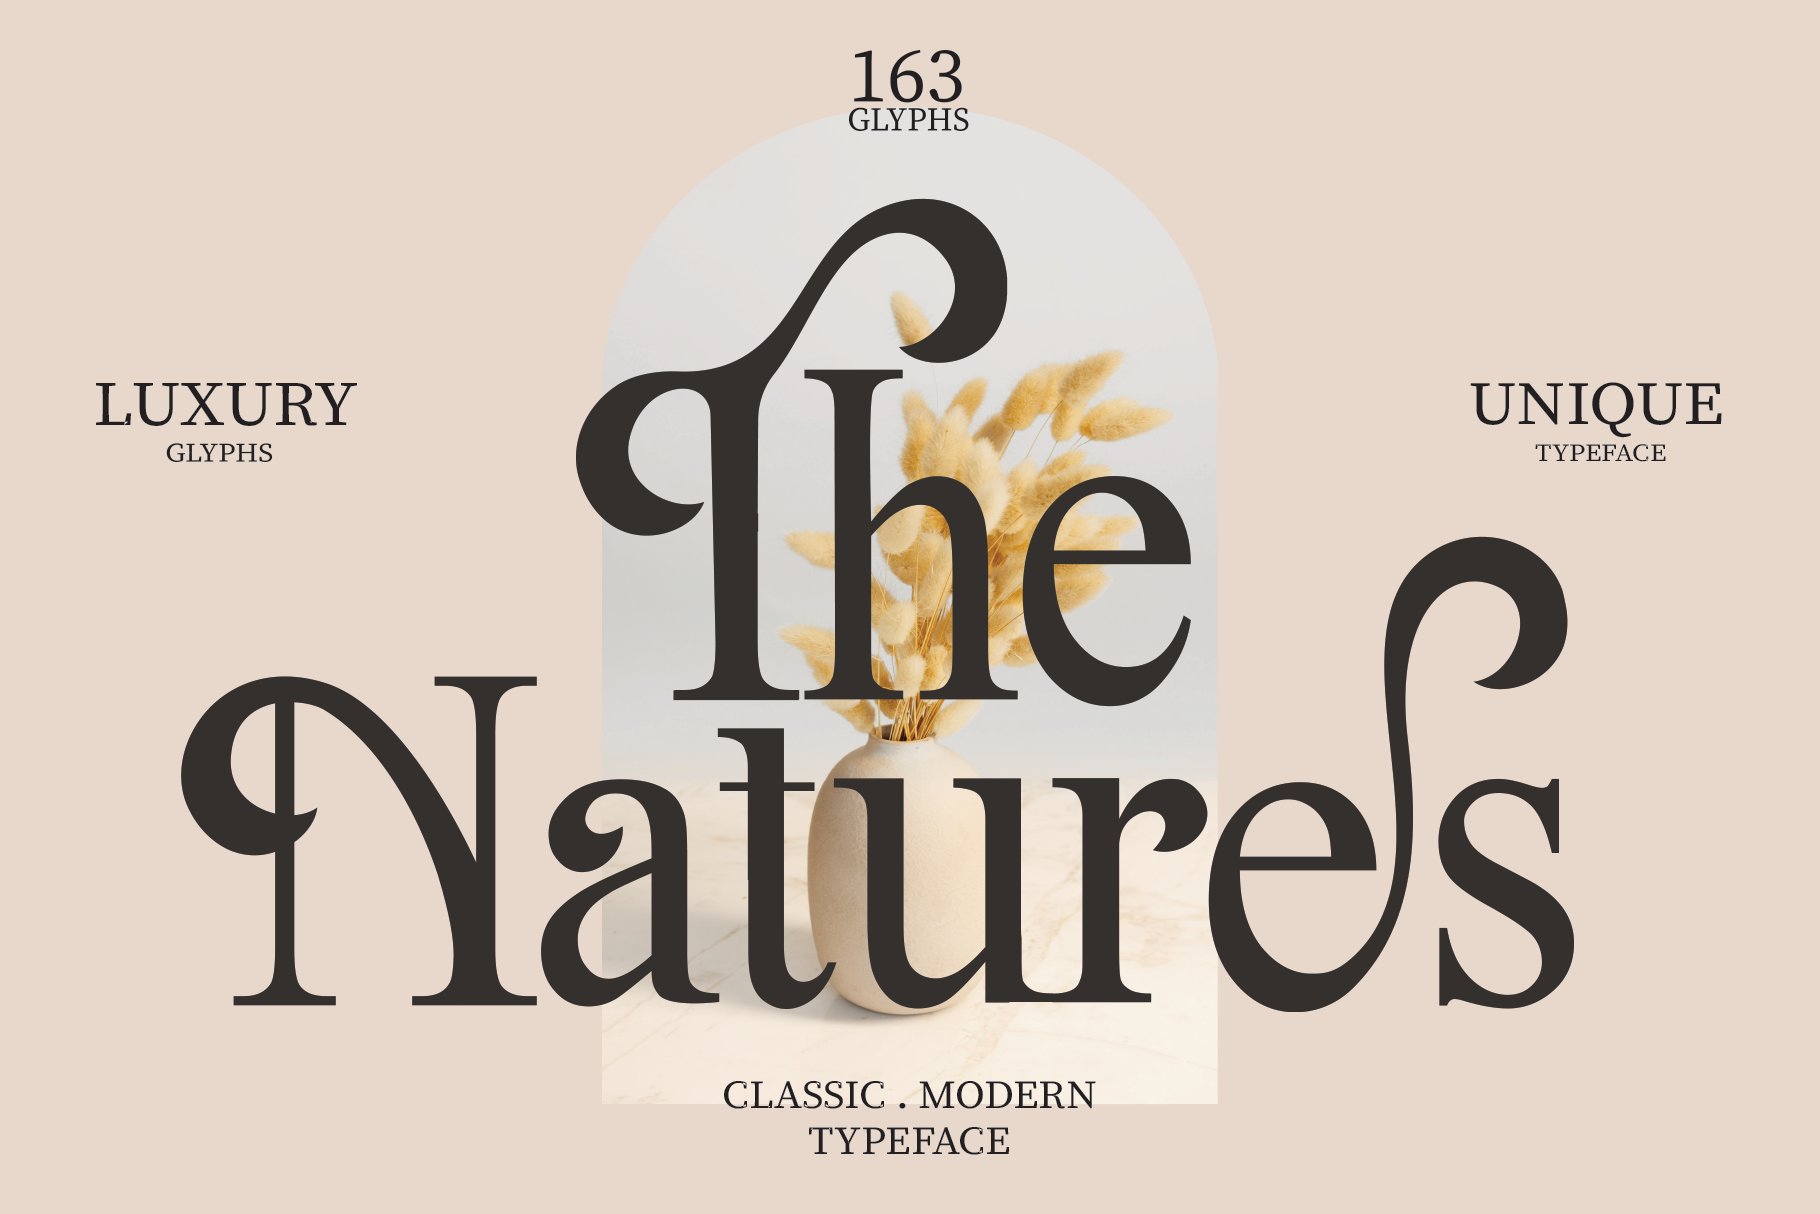 The Natures / Modern Font cover image.